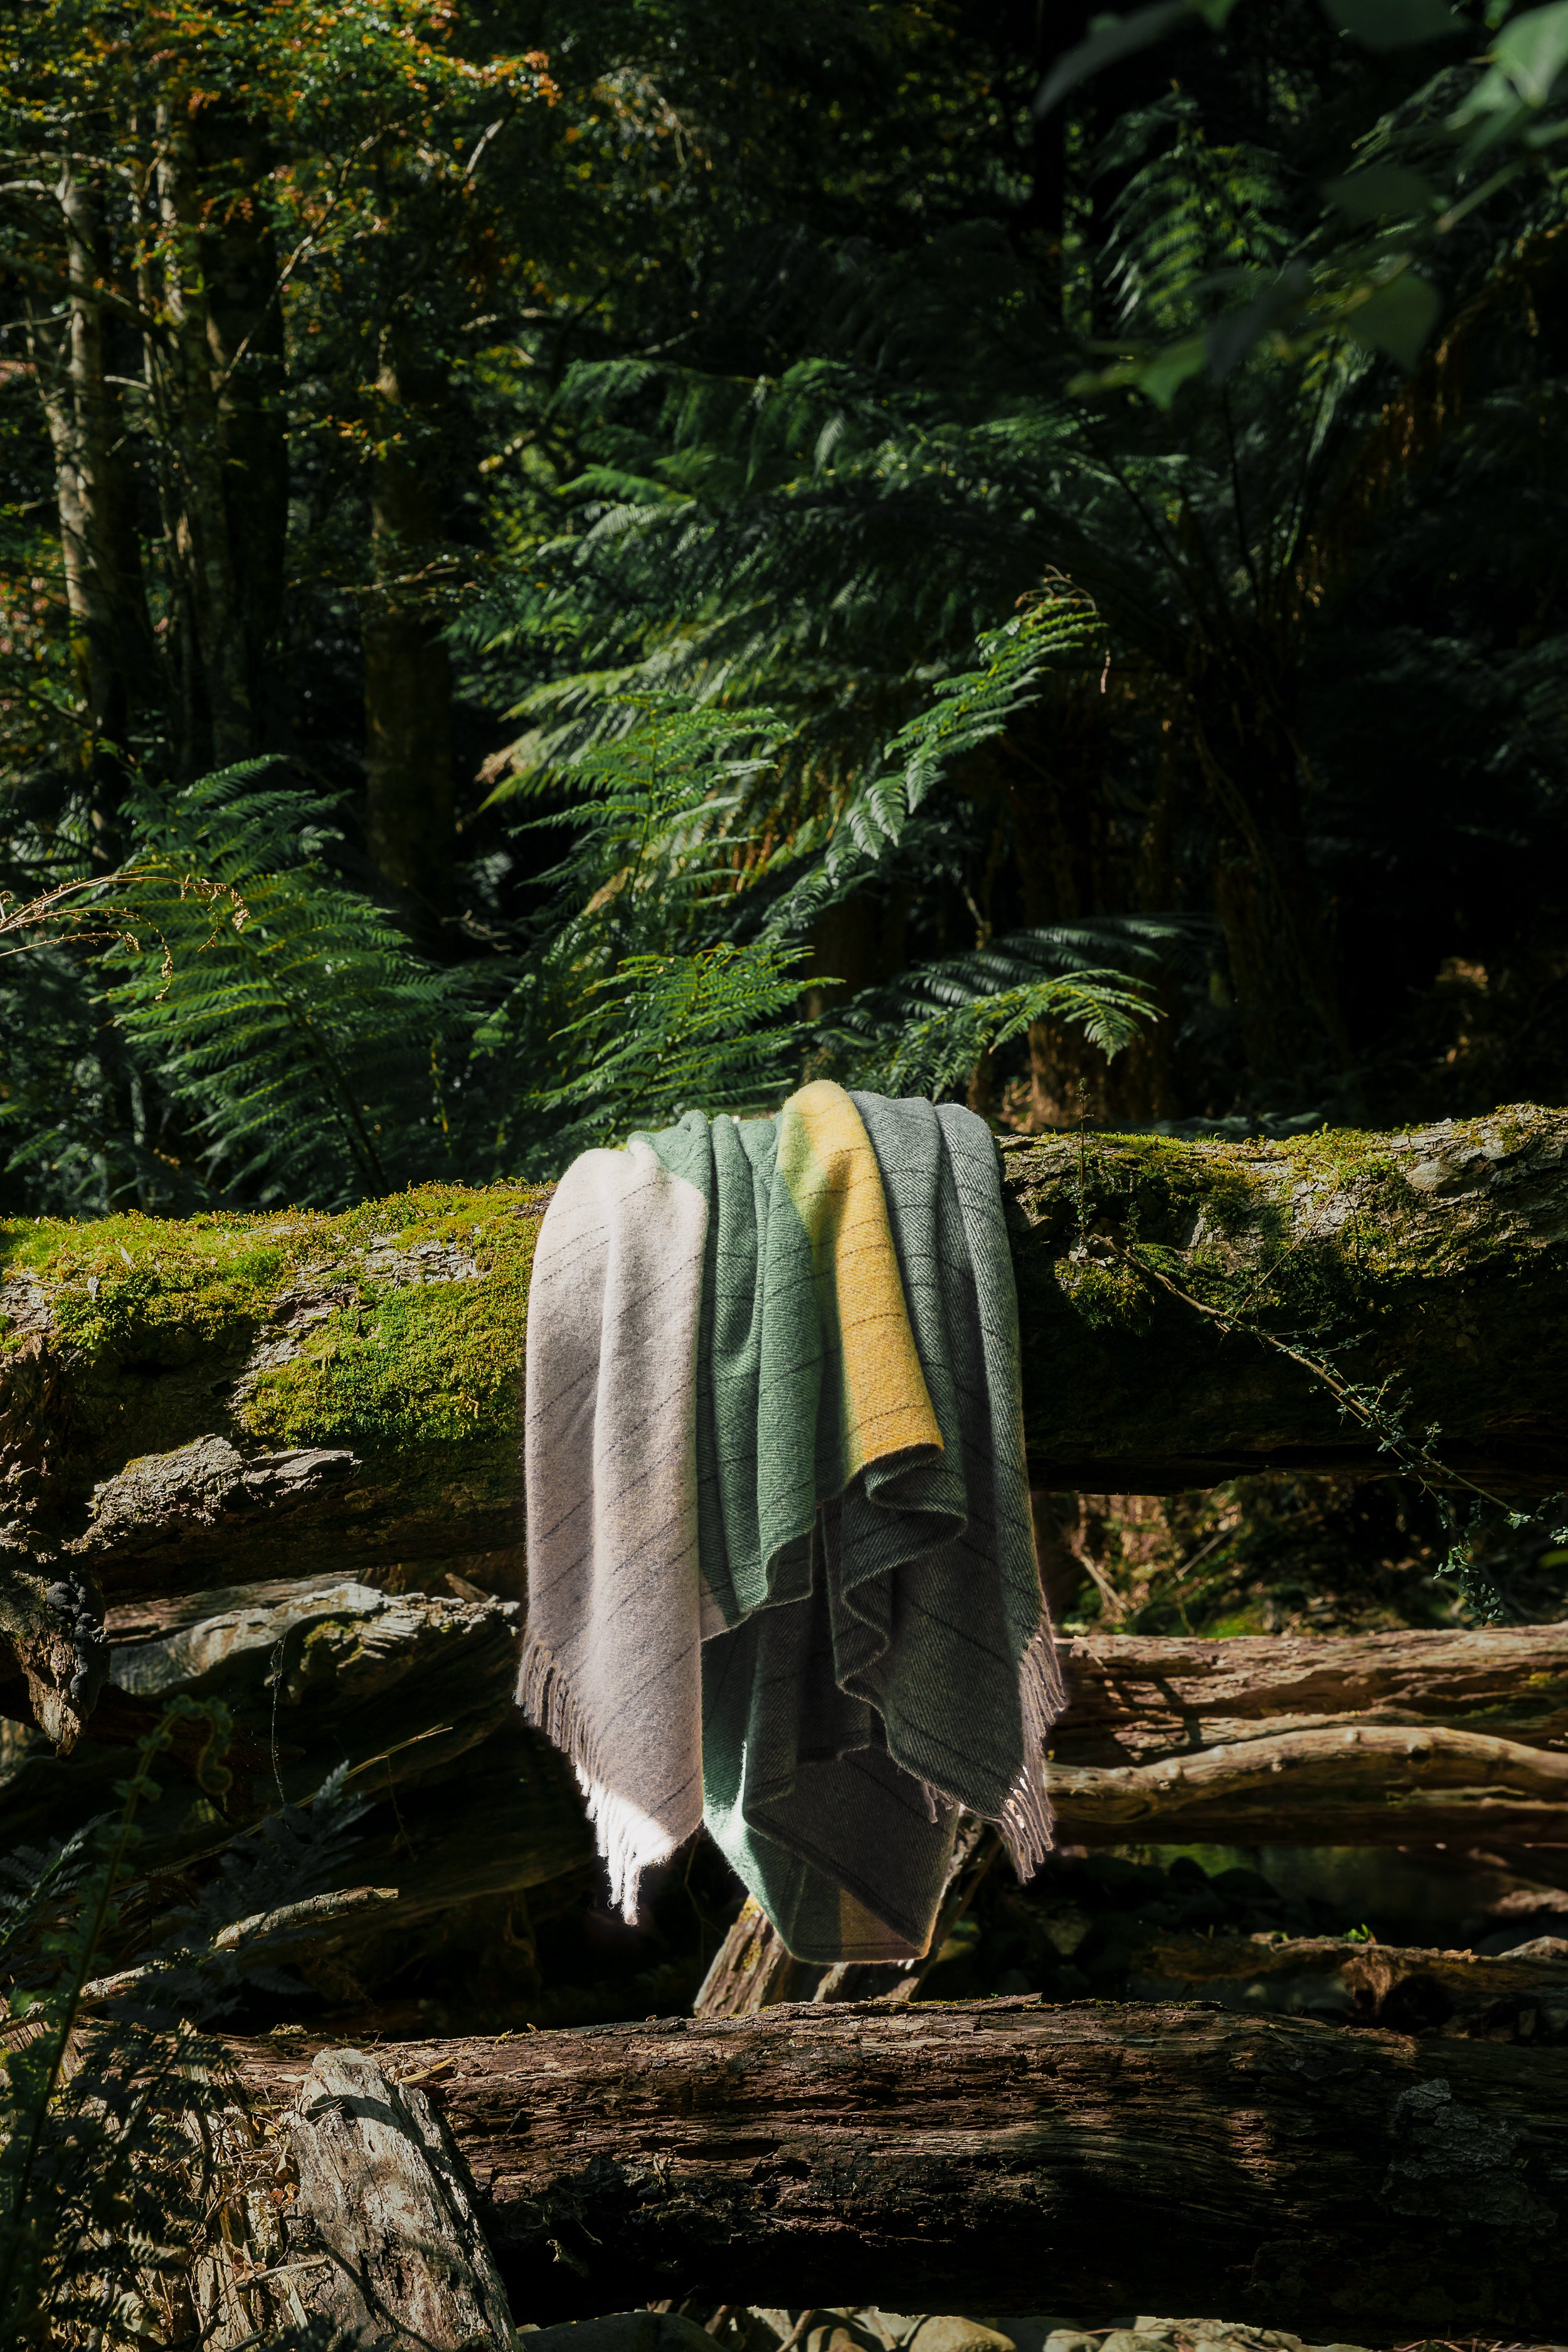 The Tarkine Forest throw draped over a mossy log in the Tarkine.